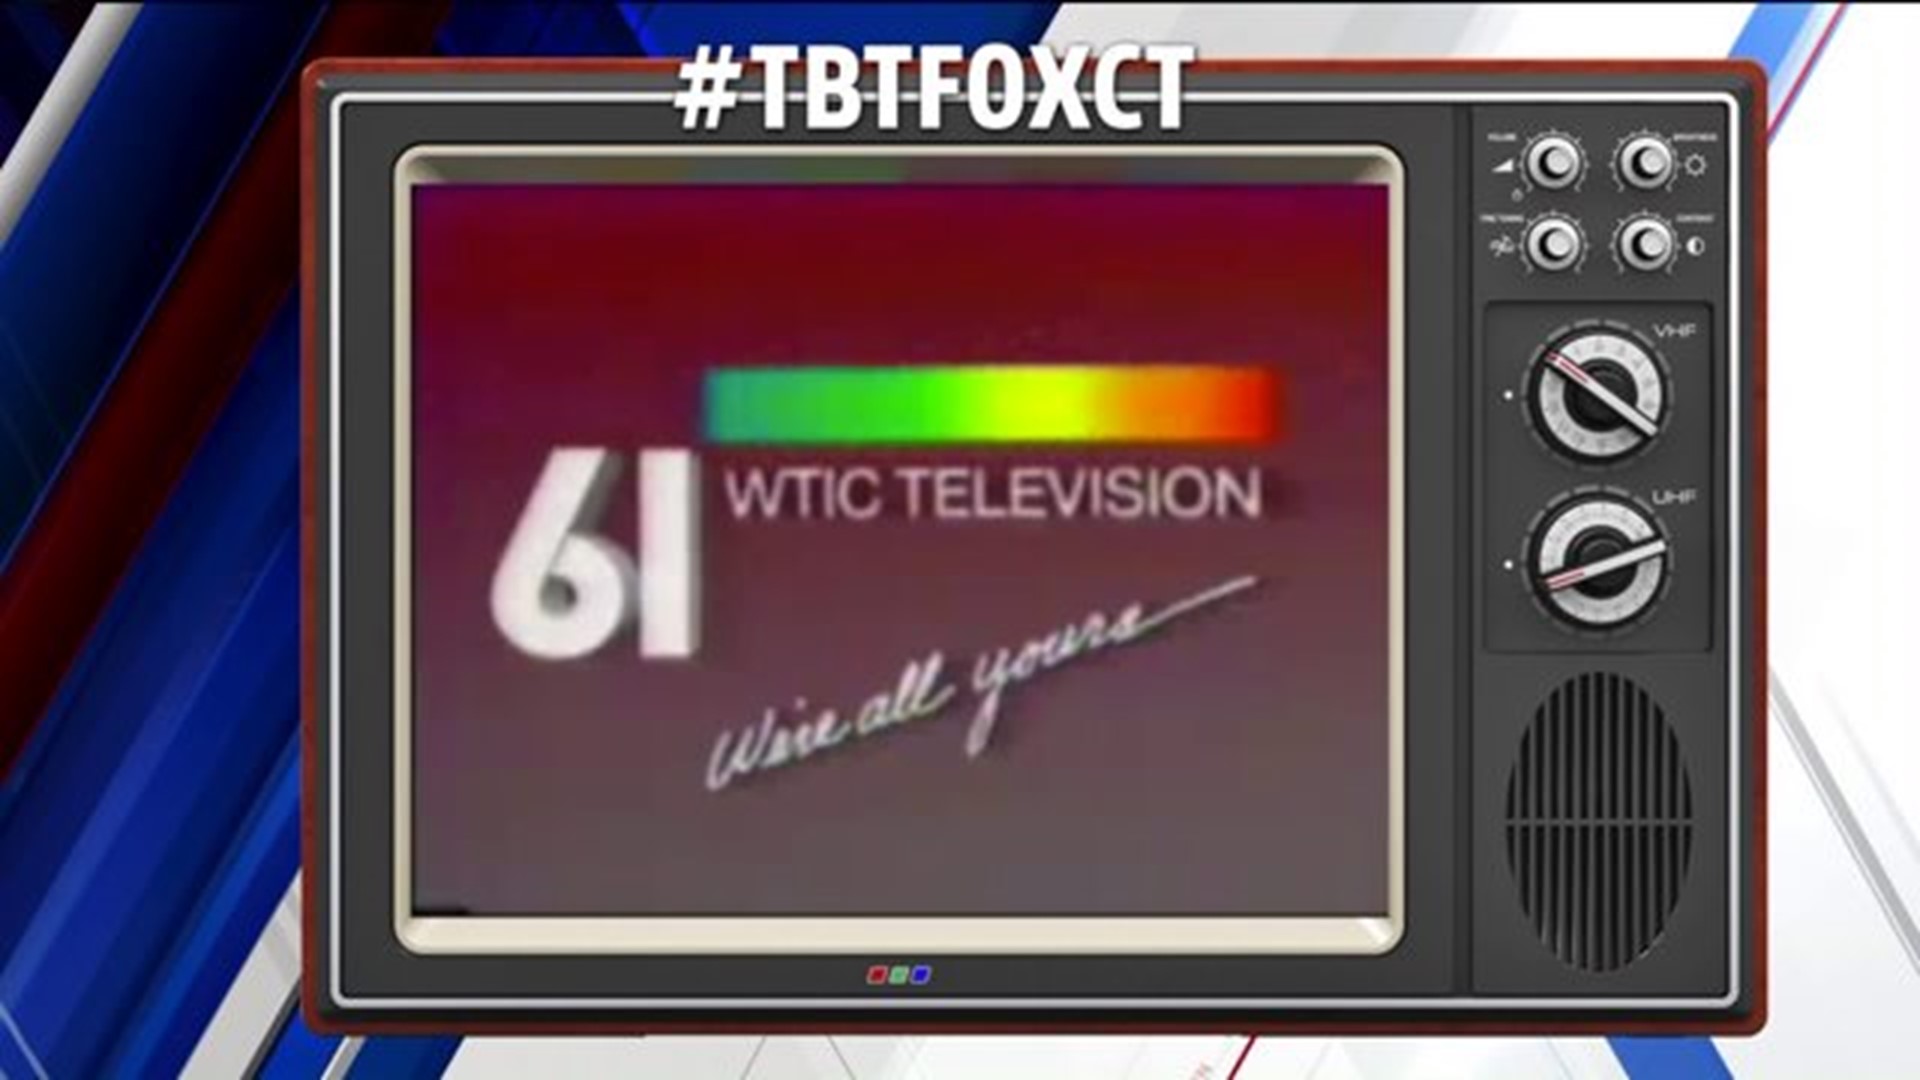 #TBTFoxCT: Do you remember this Channel 61 spot?